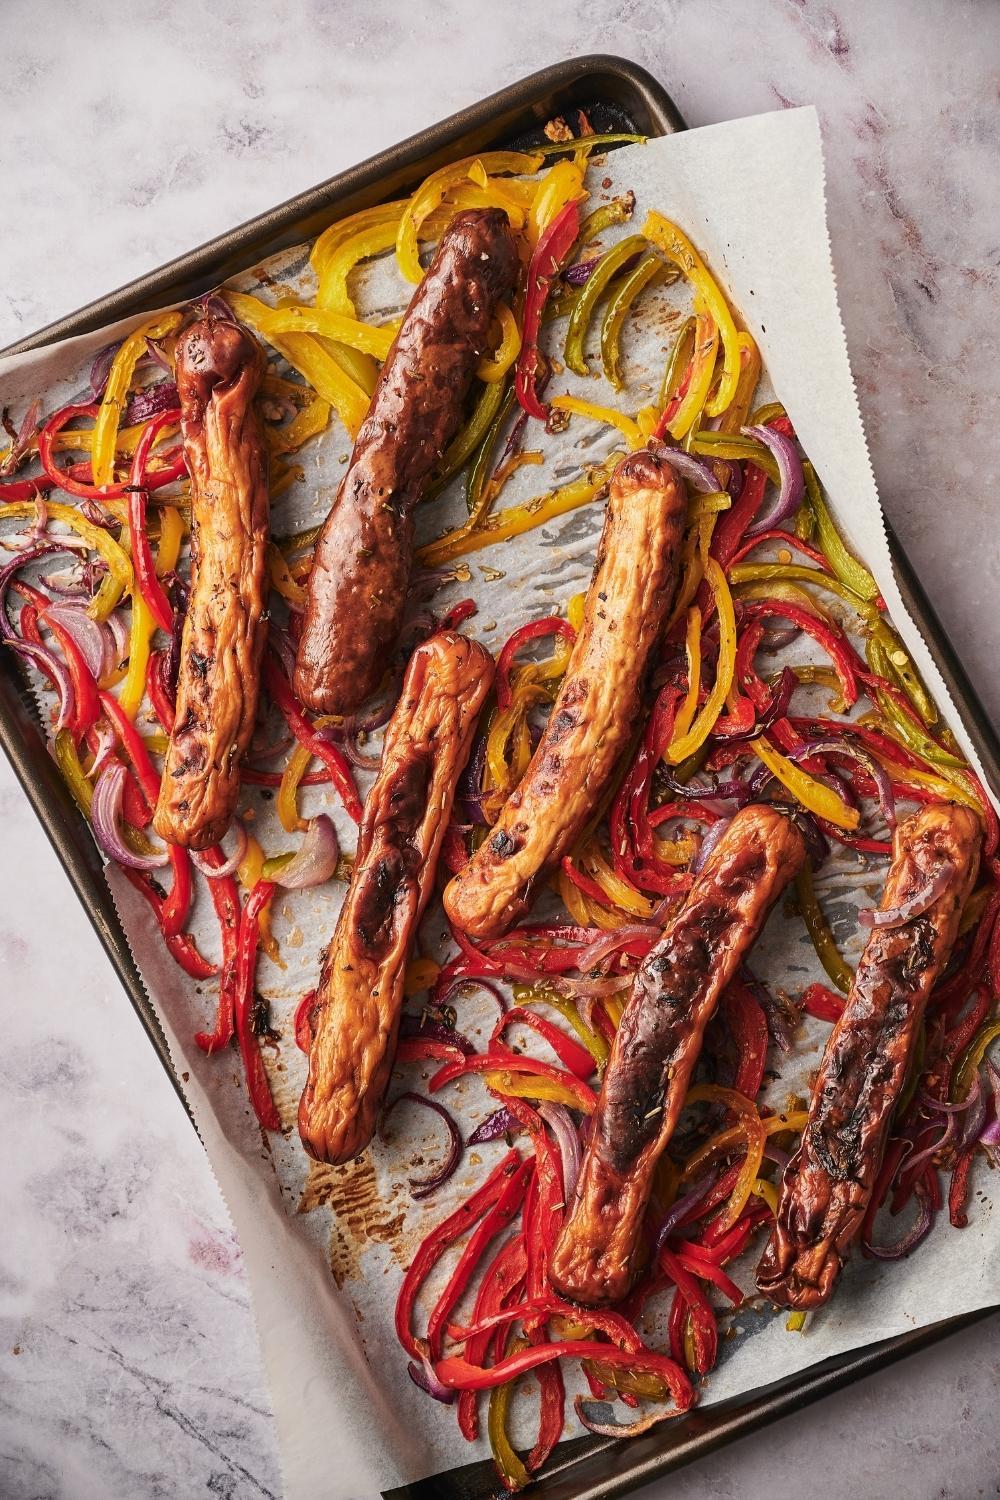 Roasted chicken sausages, bell peppers, and onions on a parchment paper lined baking tray.